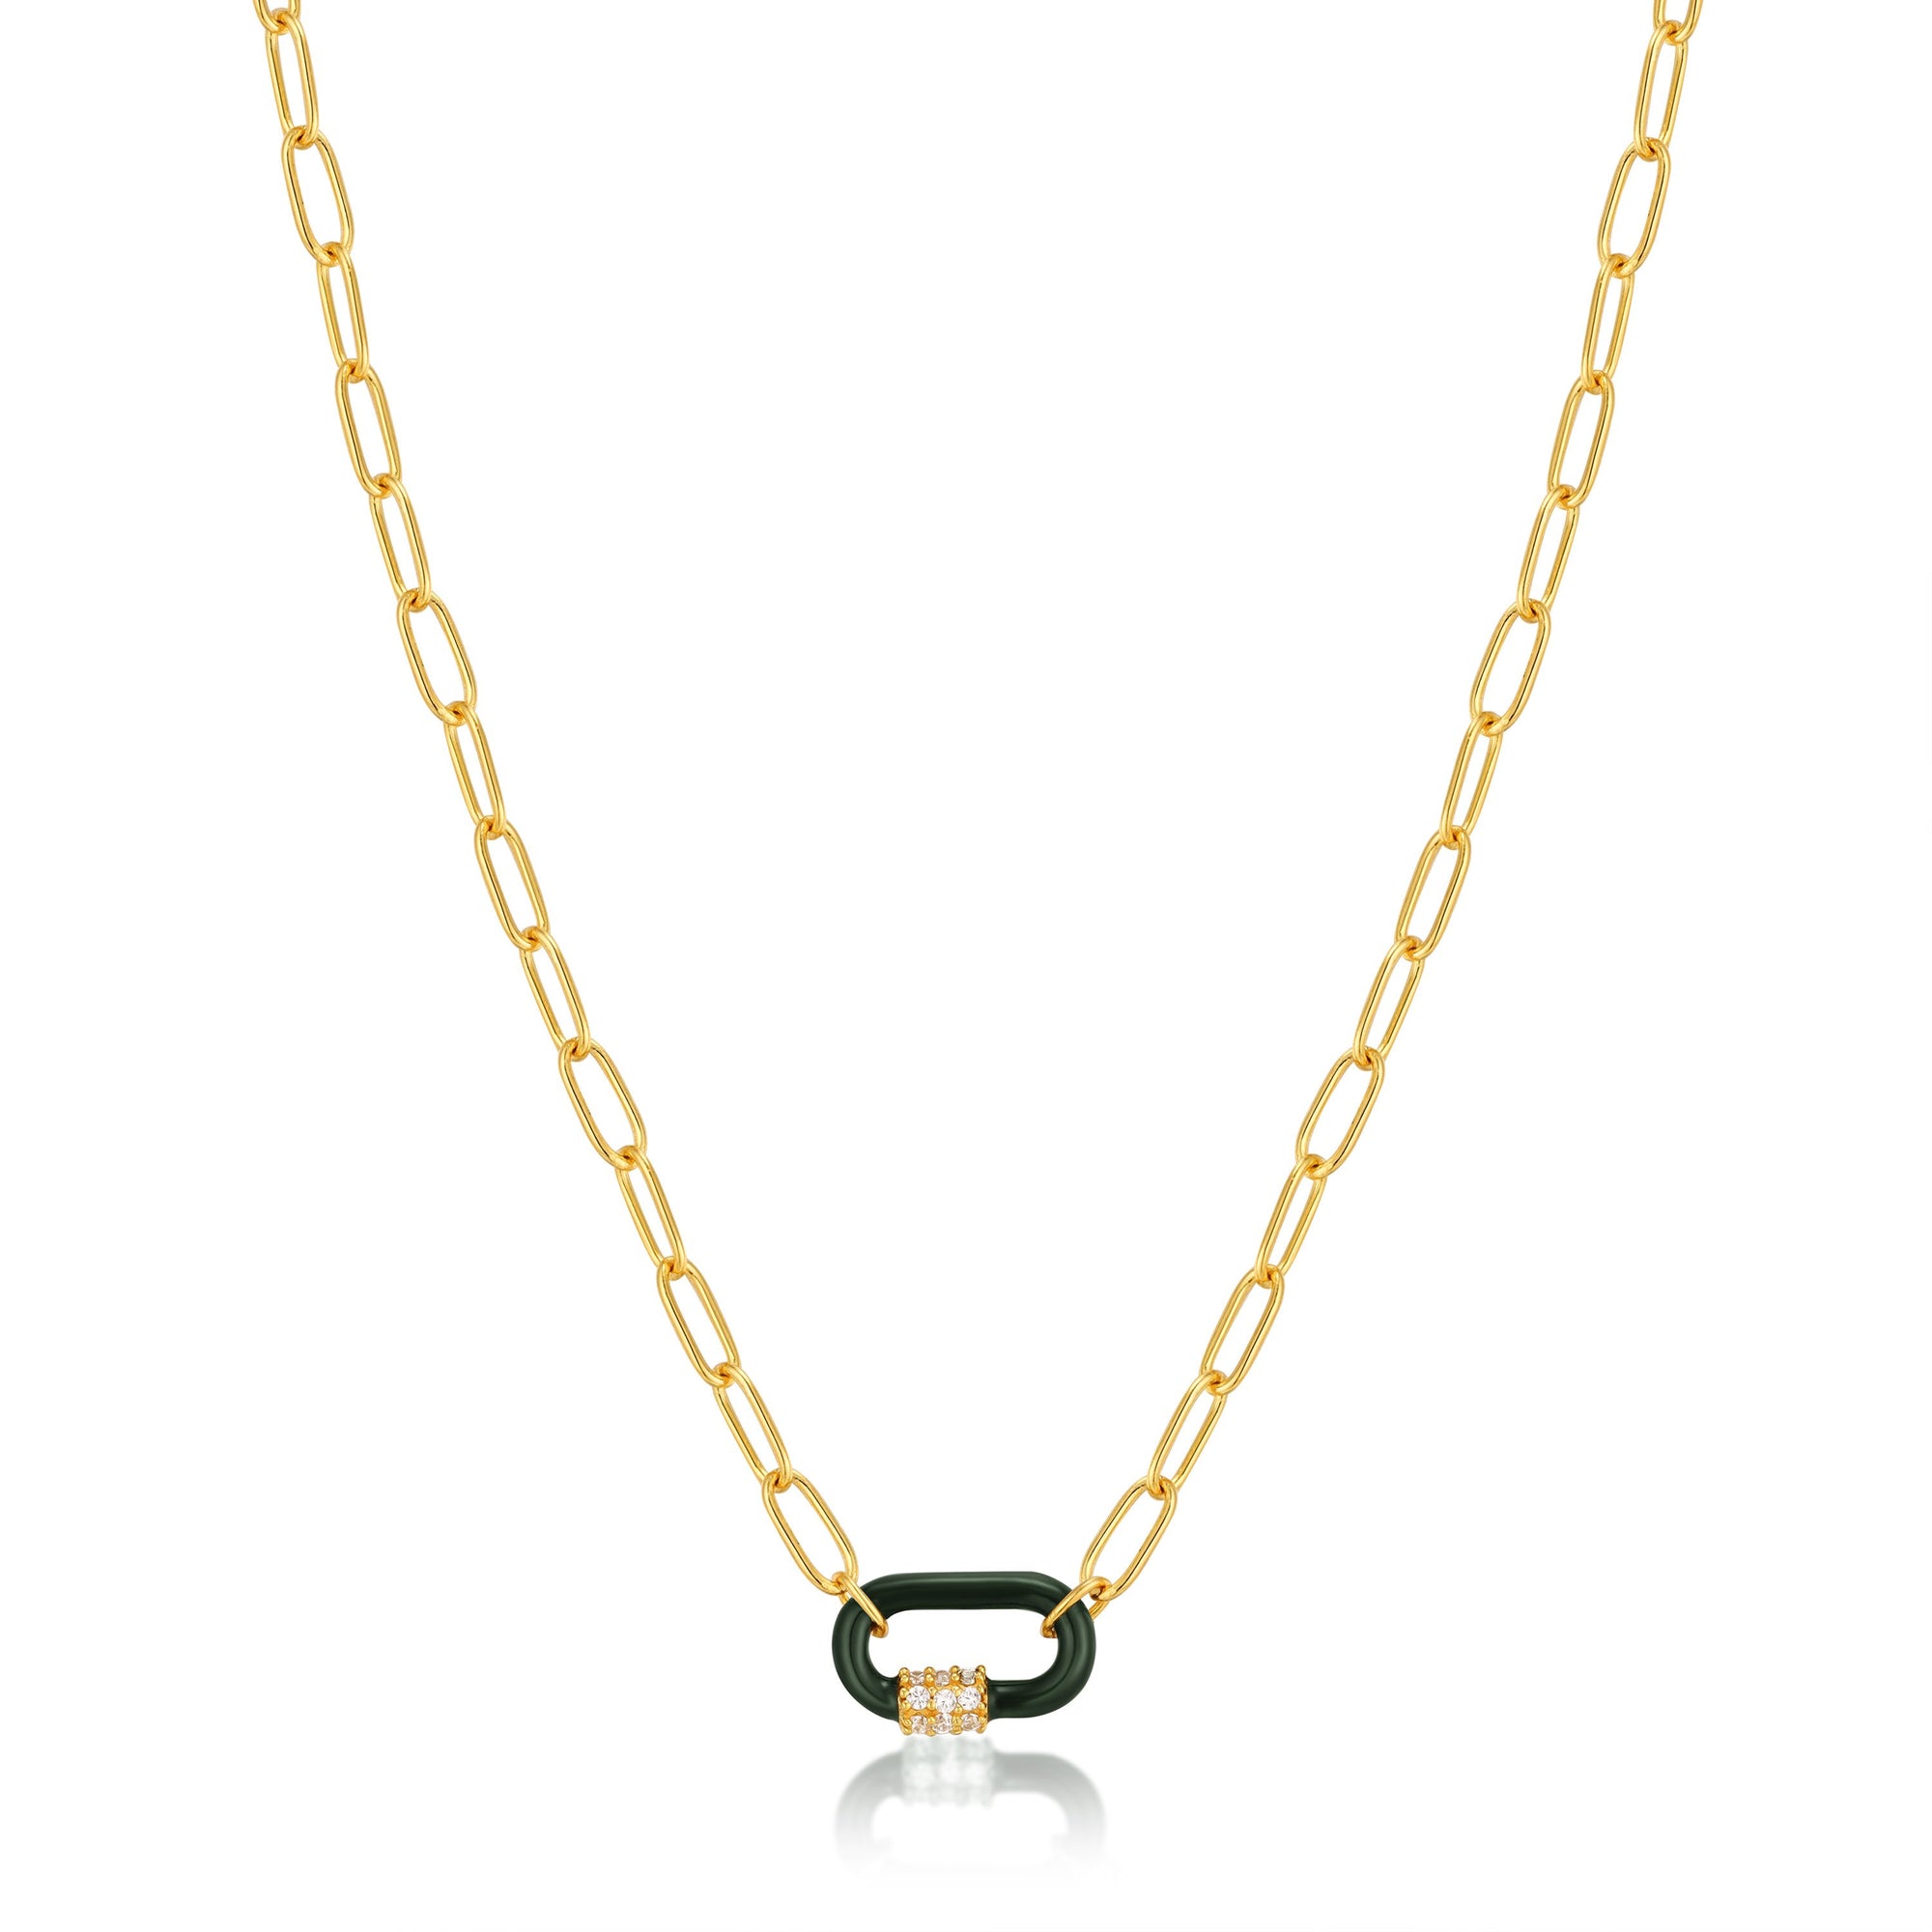 ANIA HAIE ANIA HAIE - Forest Green Enamel Carabiner Gold Necklace available at The Good Life Boutique